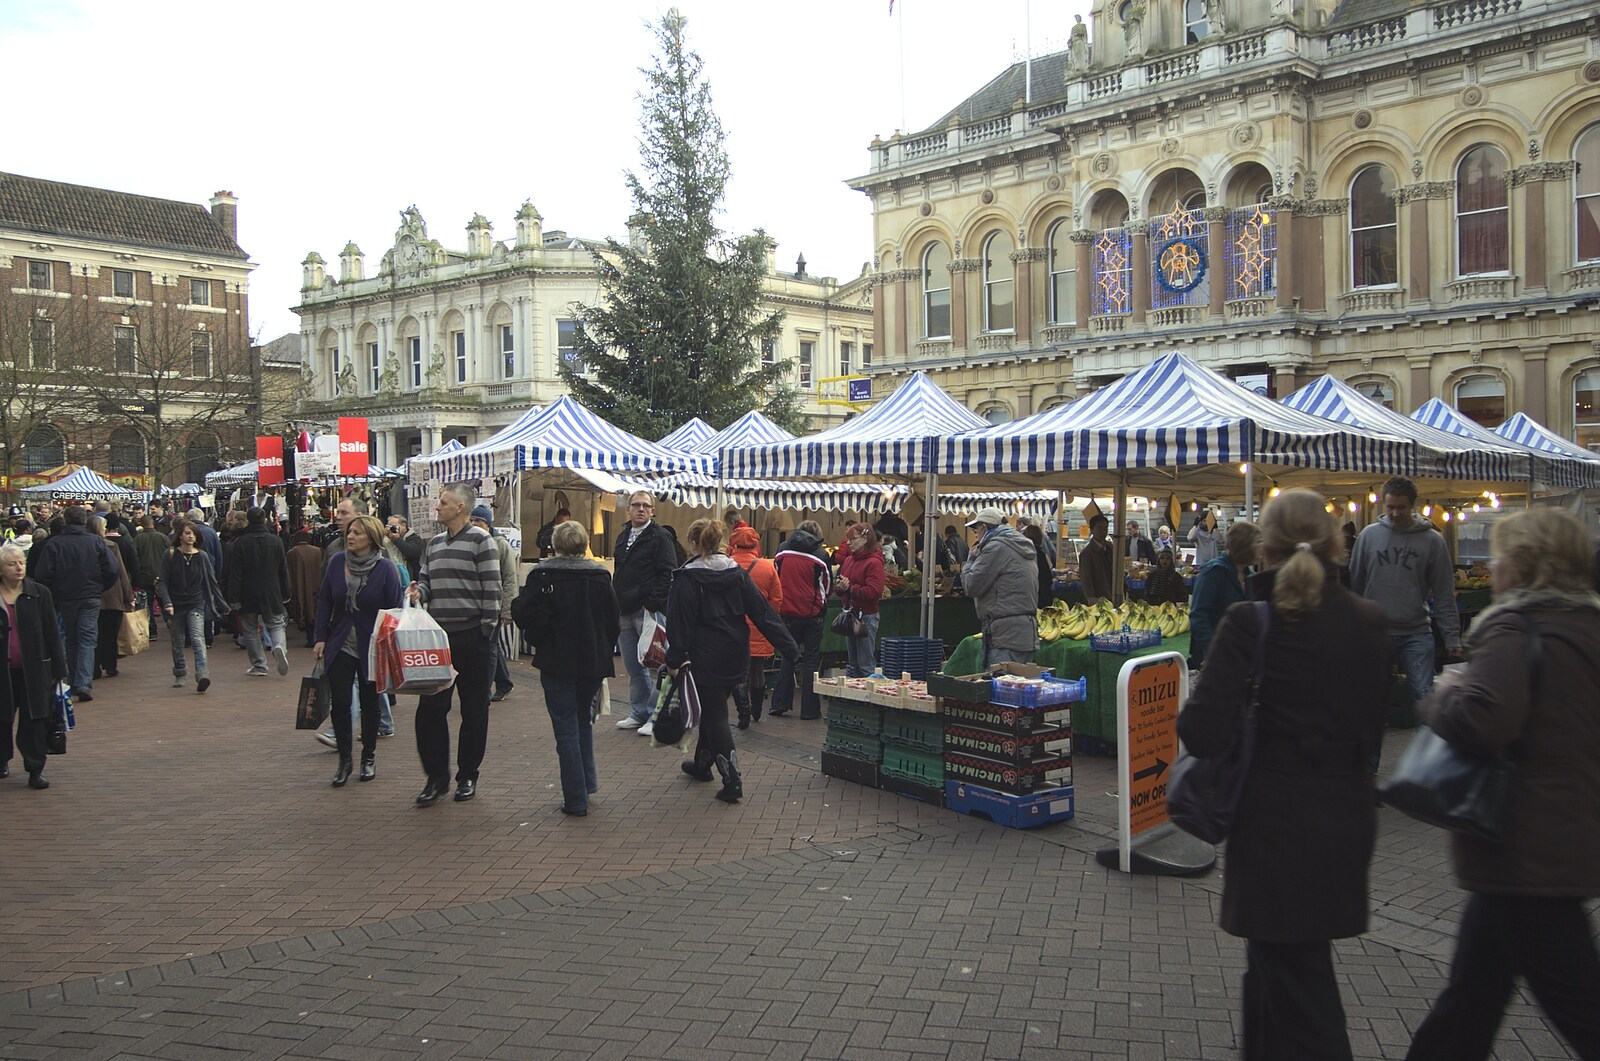 Ipswich market outside the Corn Exchange from The BSCC Christmas Dinner, The Swan Inn, Brome, Suffolk - 5th December 2009